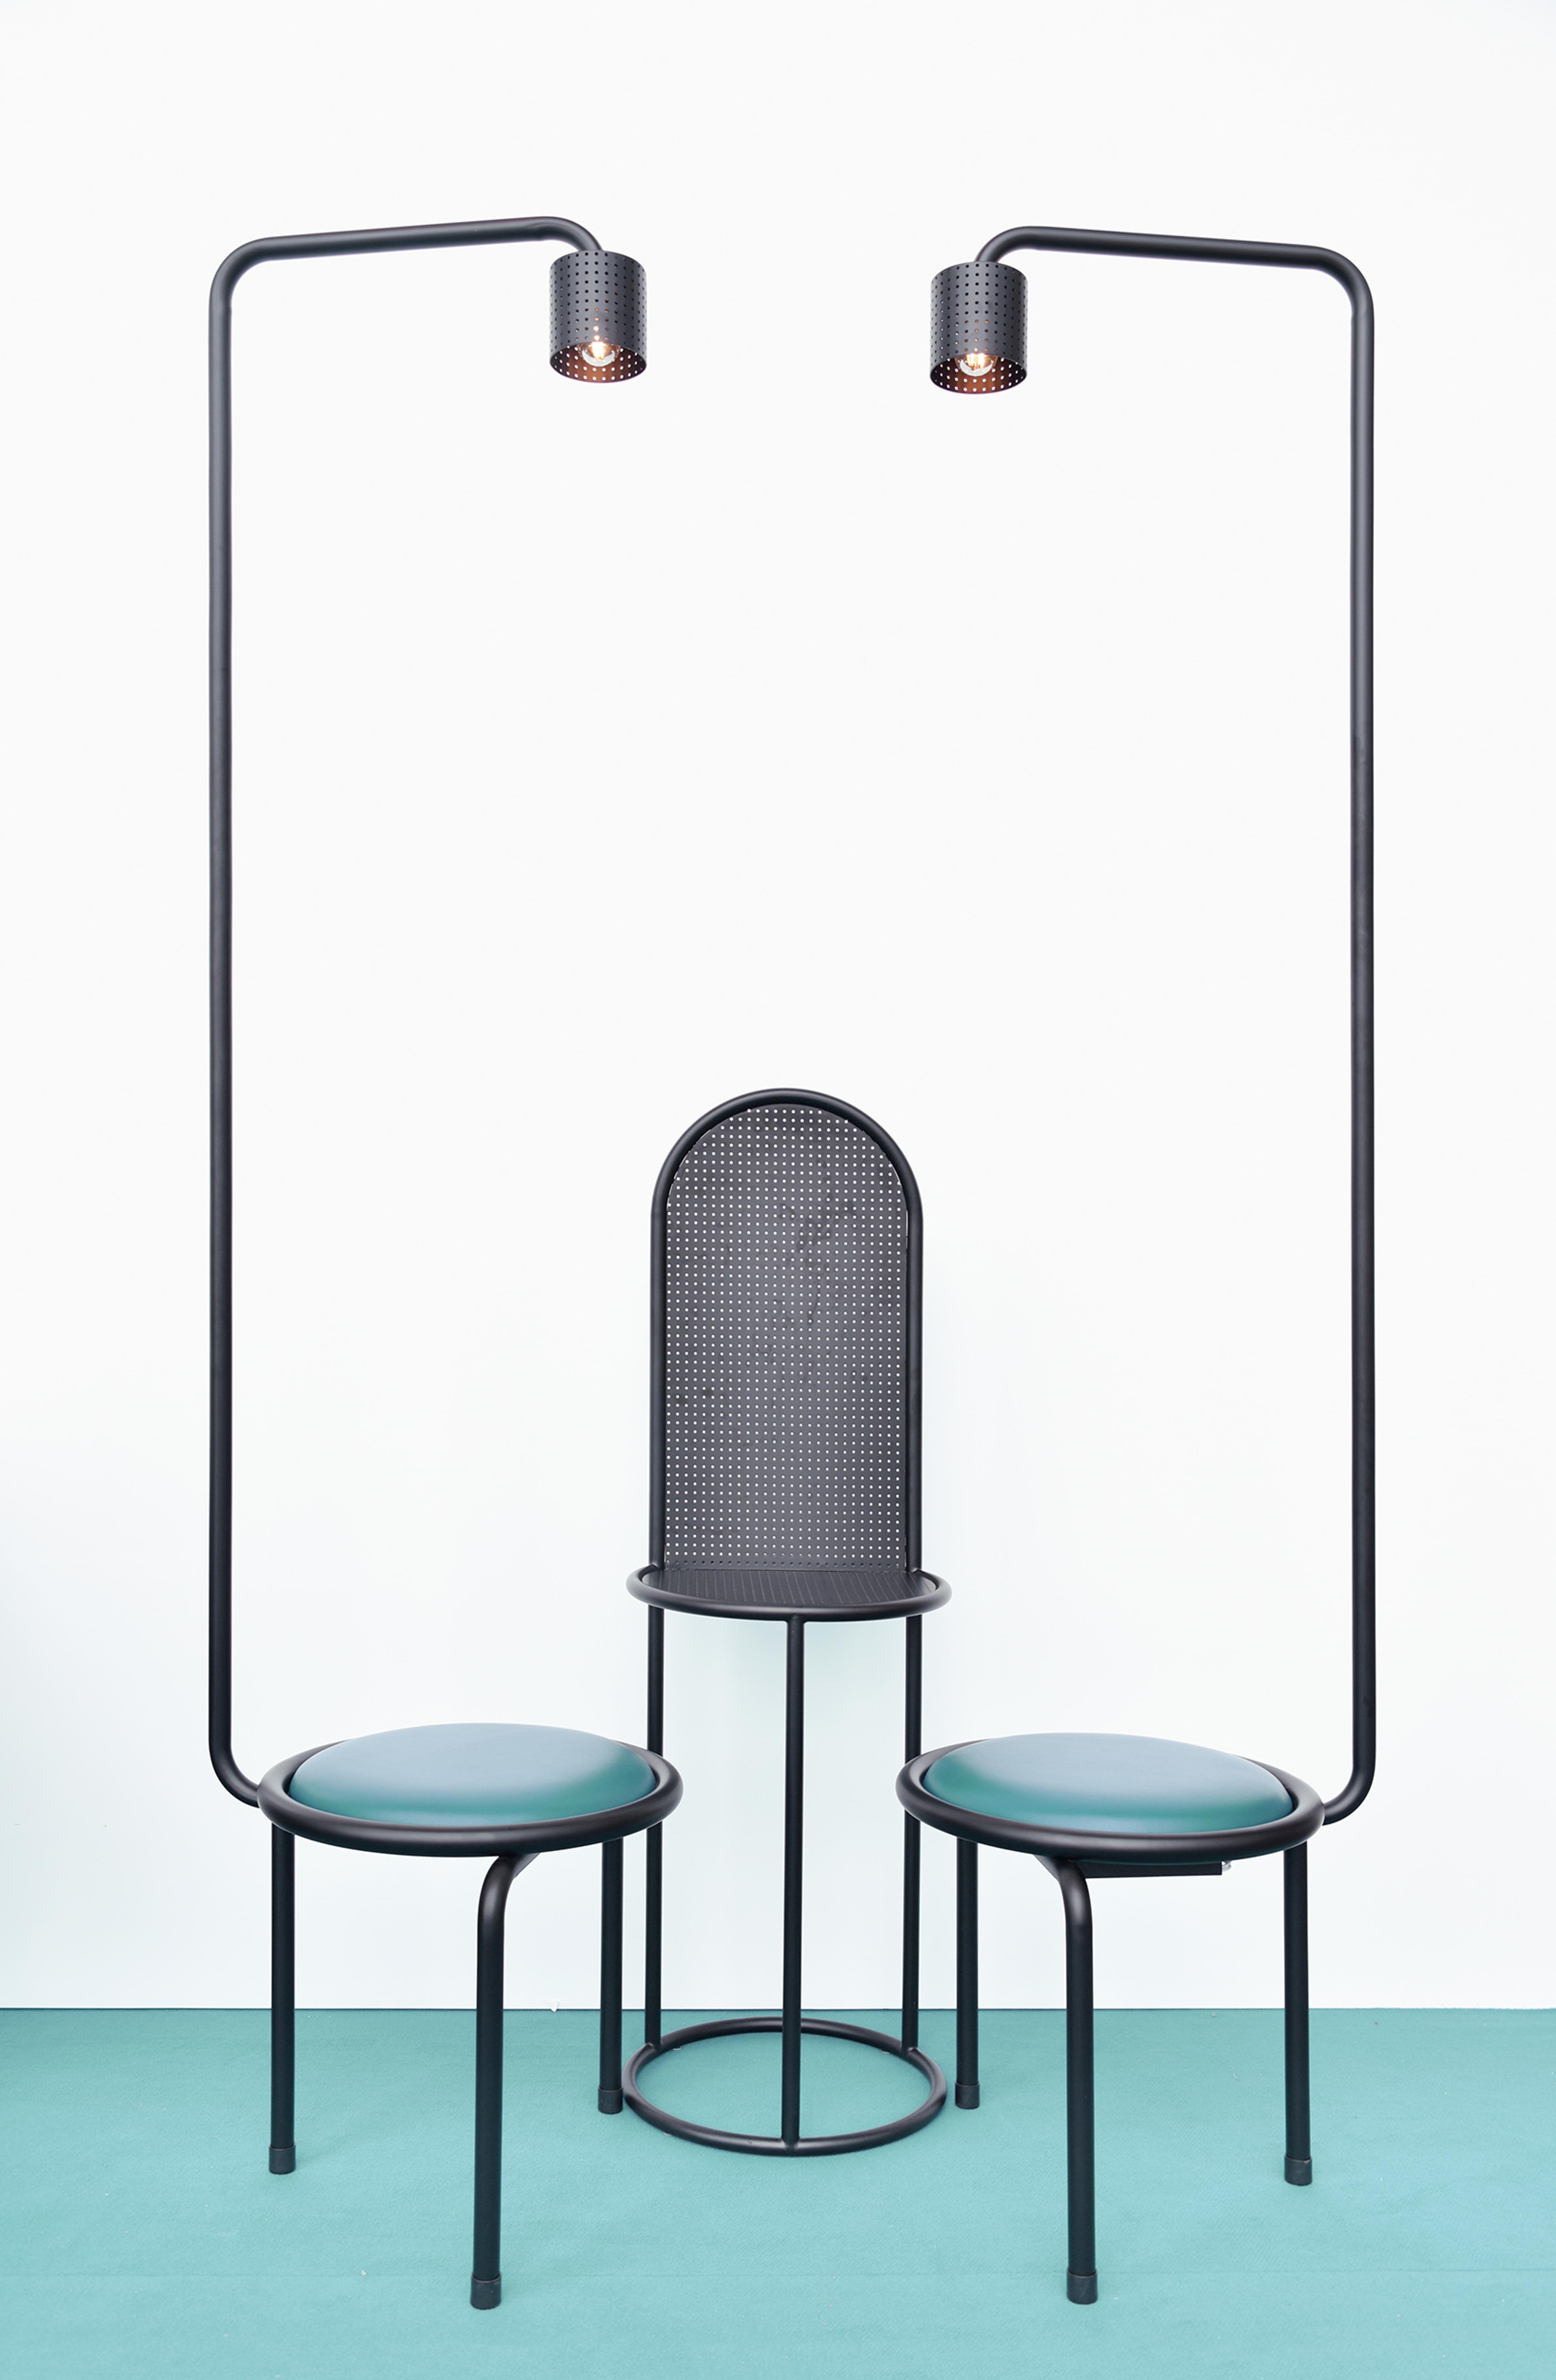 Photograph of art installation stools and chair